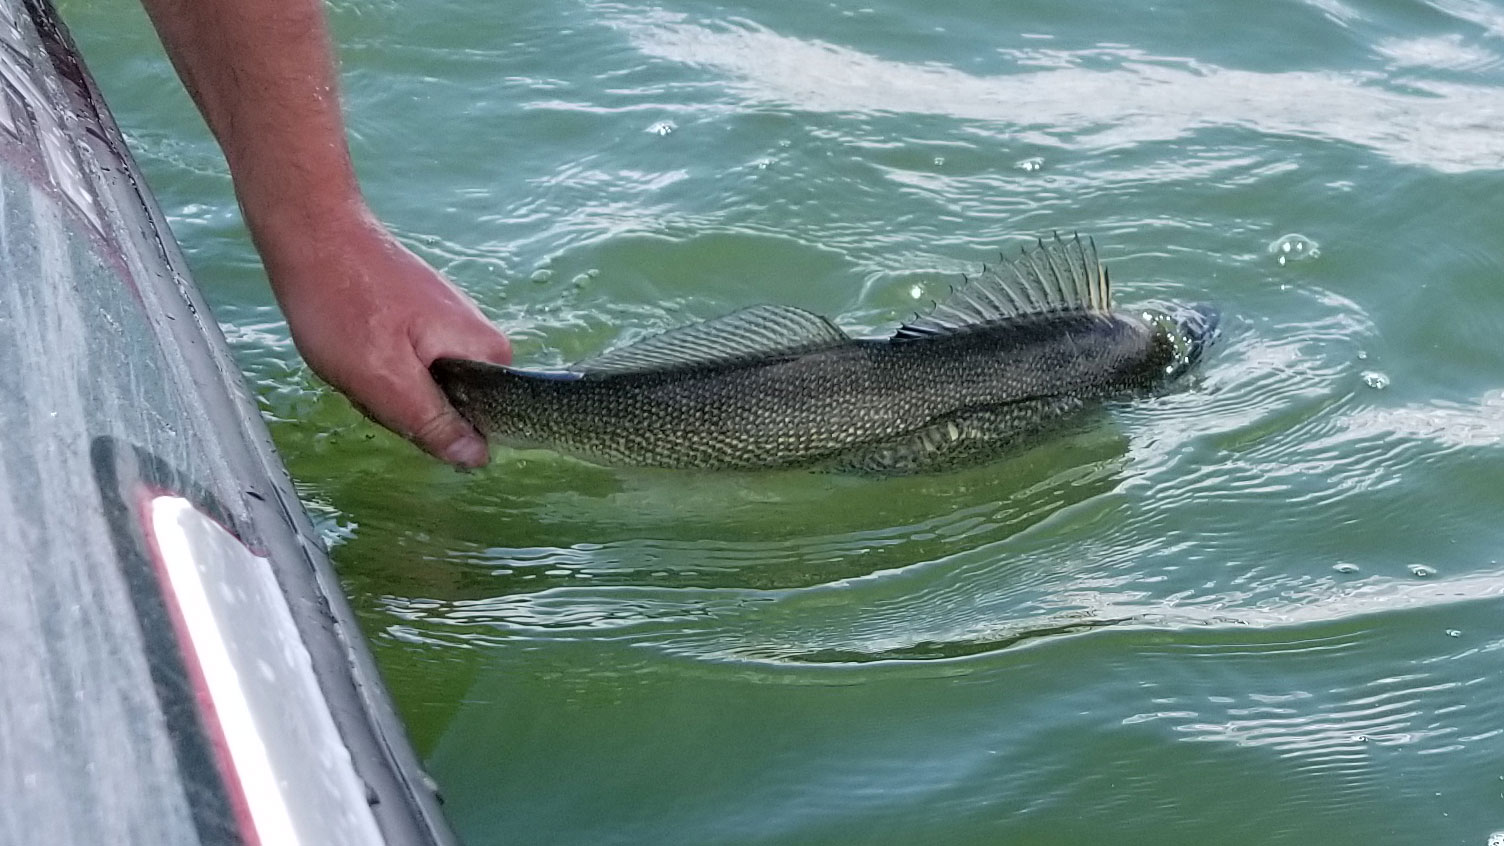 Angler releasing a fish